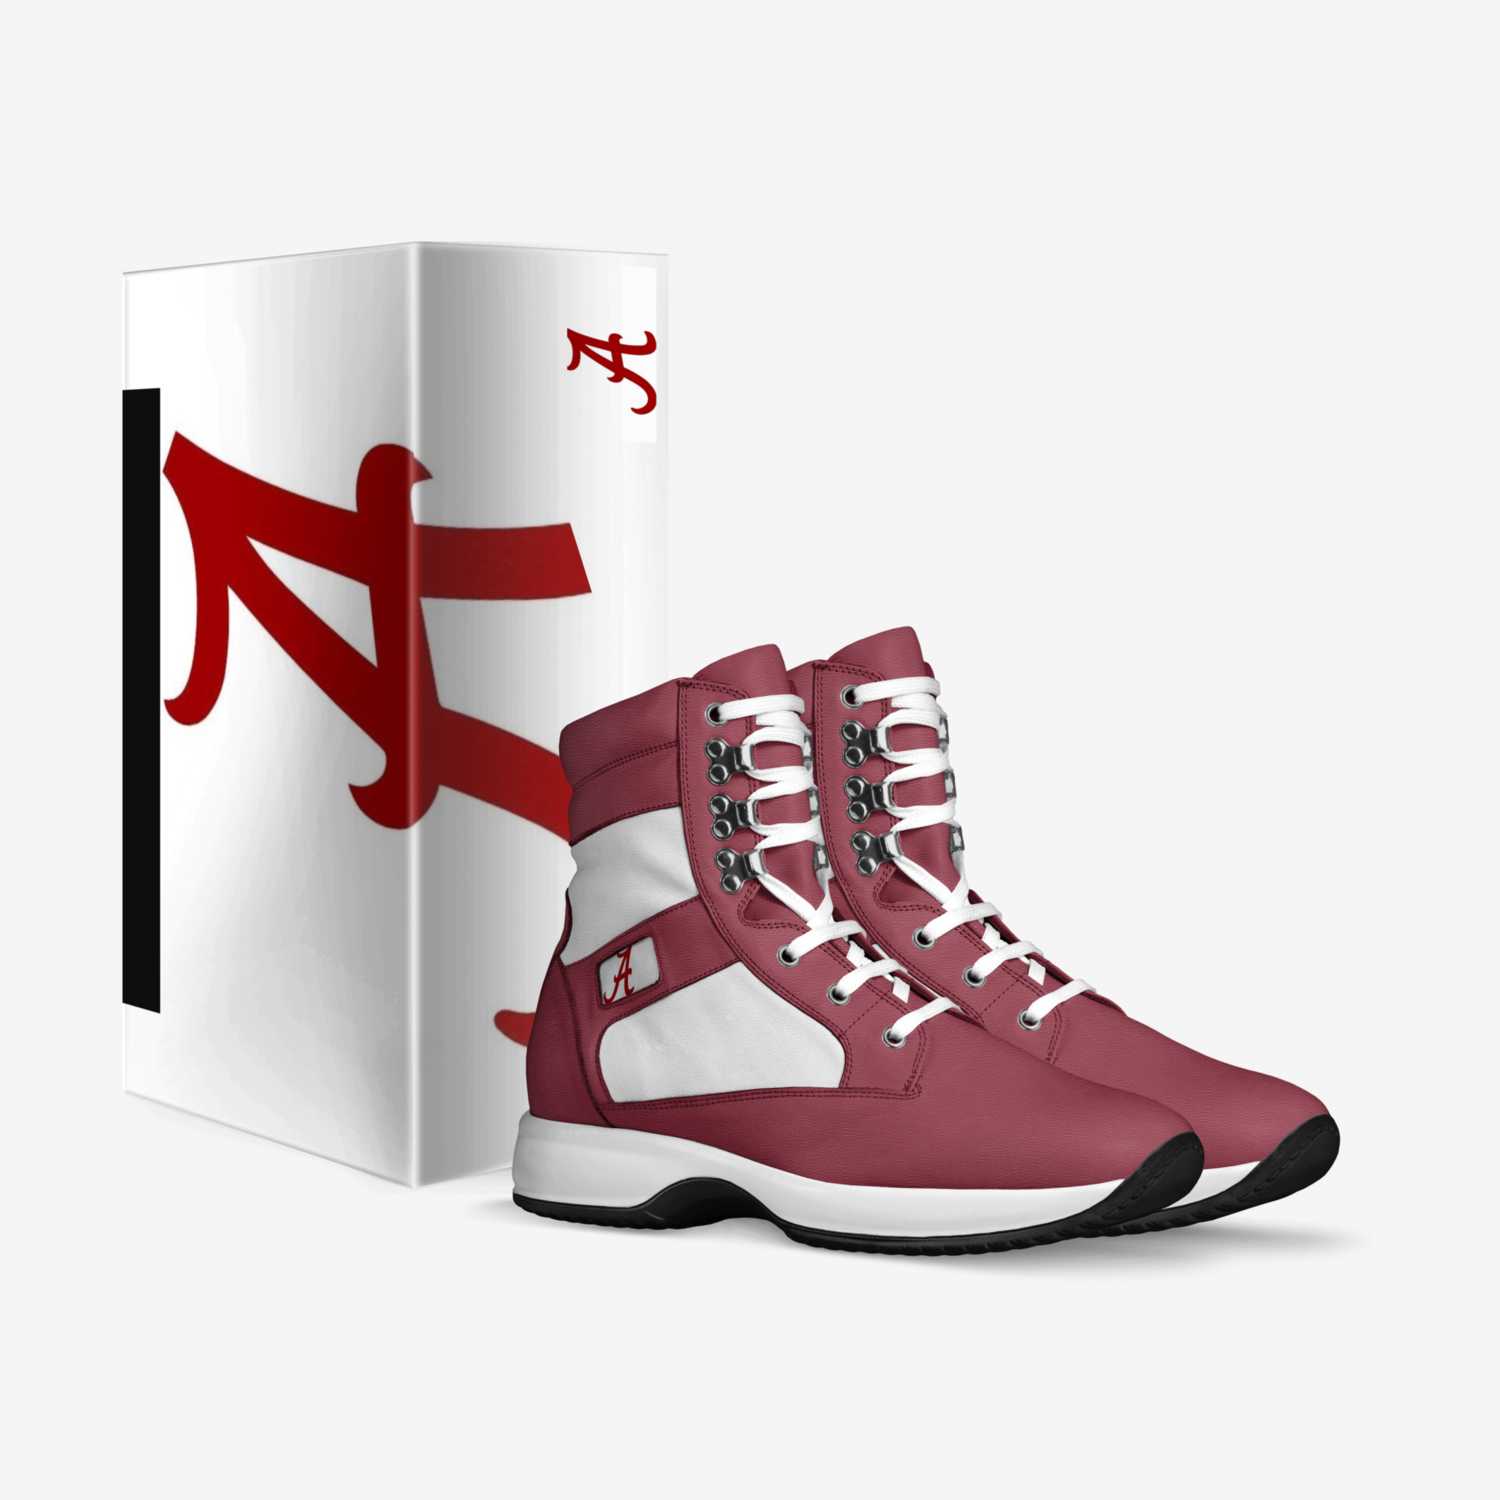 Roll tide custom made in Italy shoes by Devan Cook | Box view